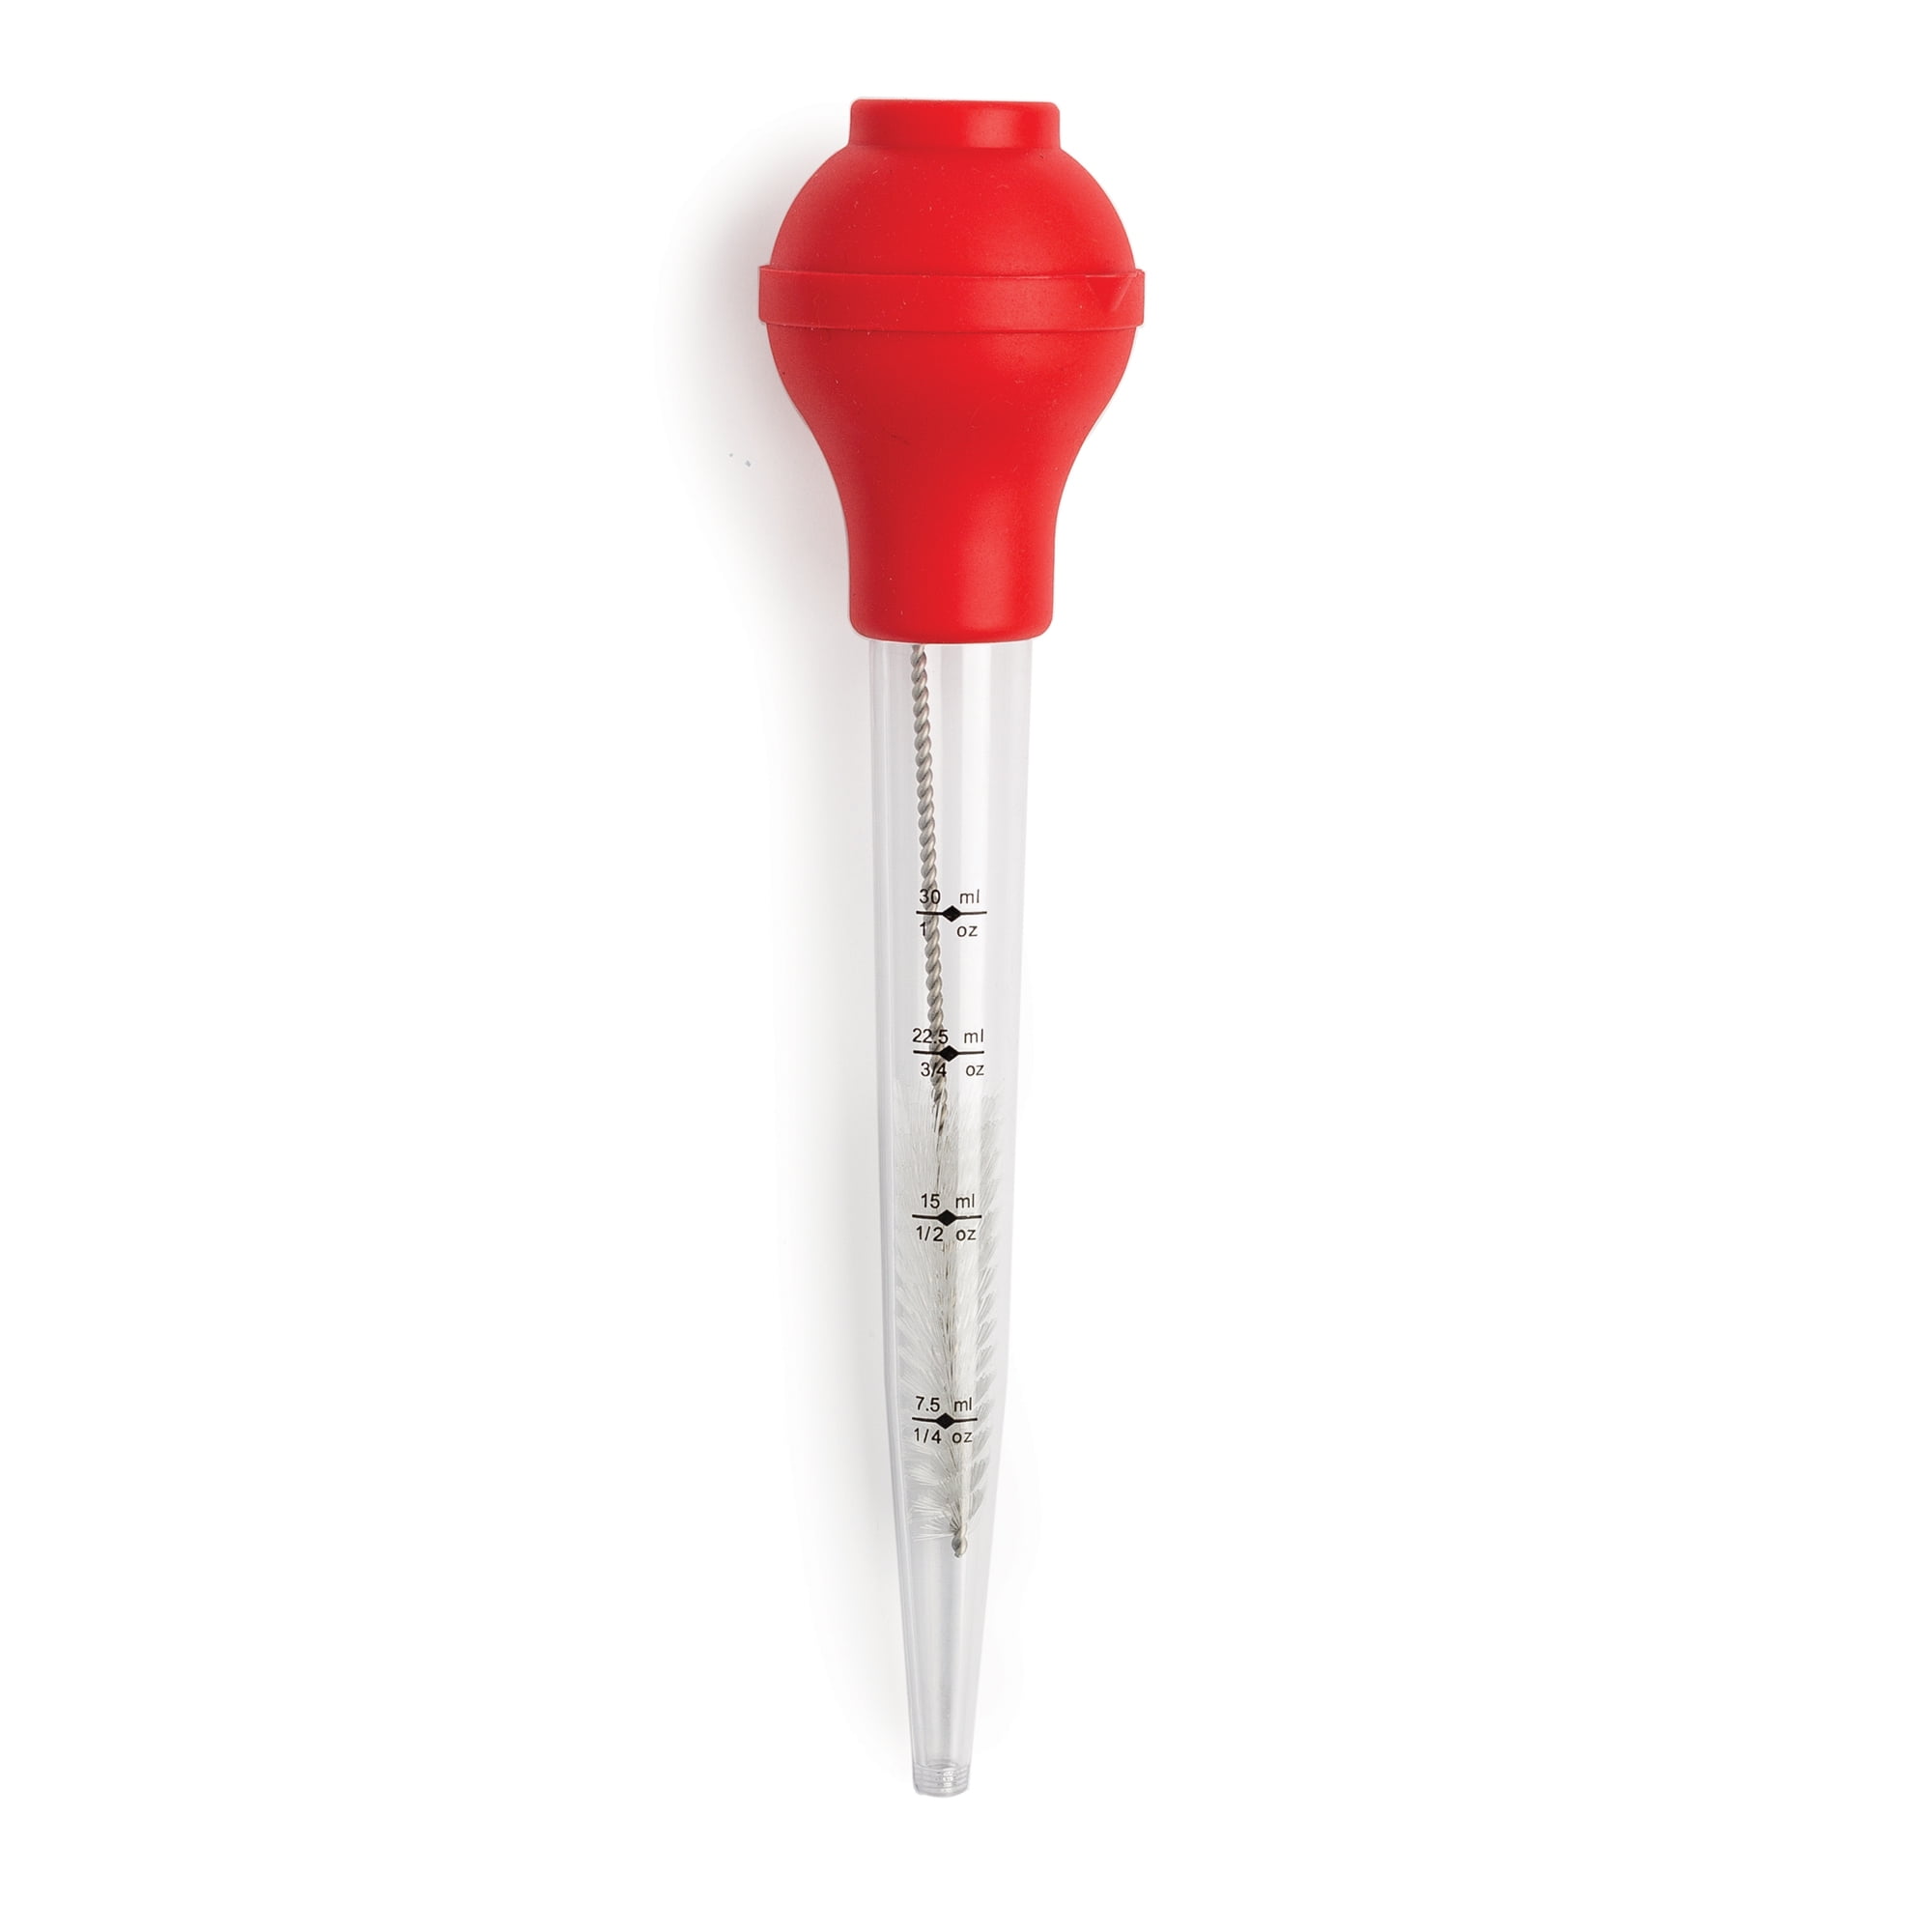 Cuisipro 3-in-1 Poultry Baster And Brush : Target